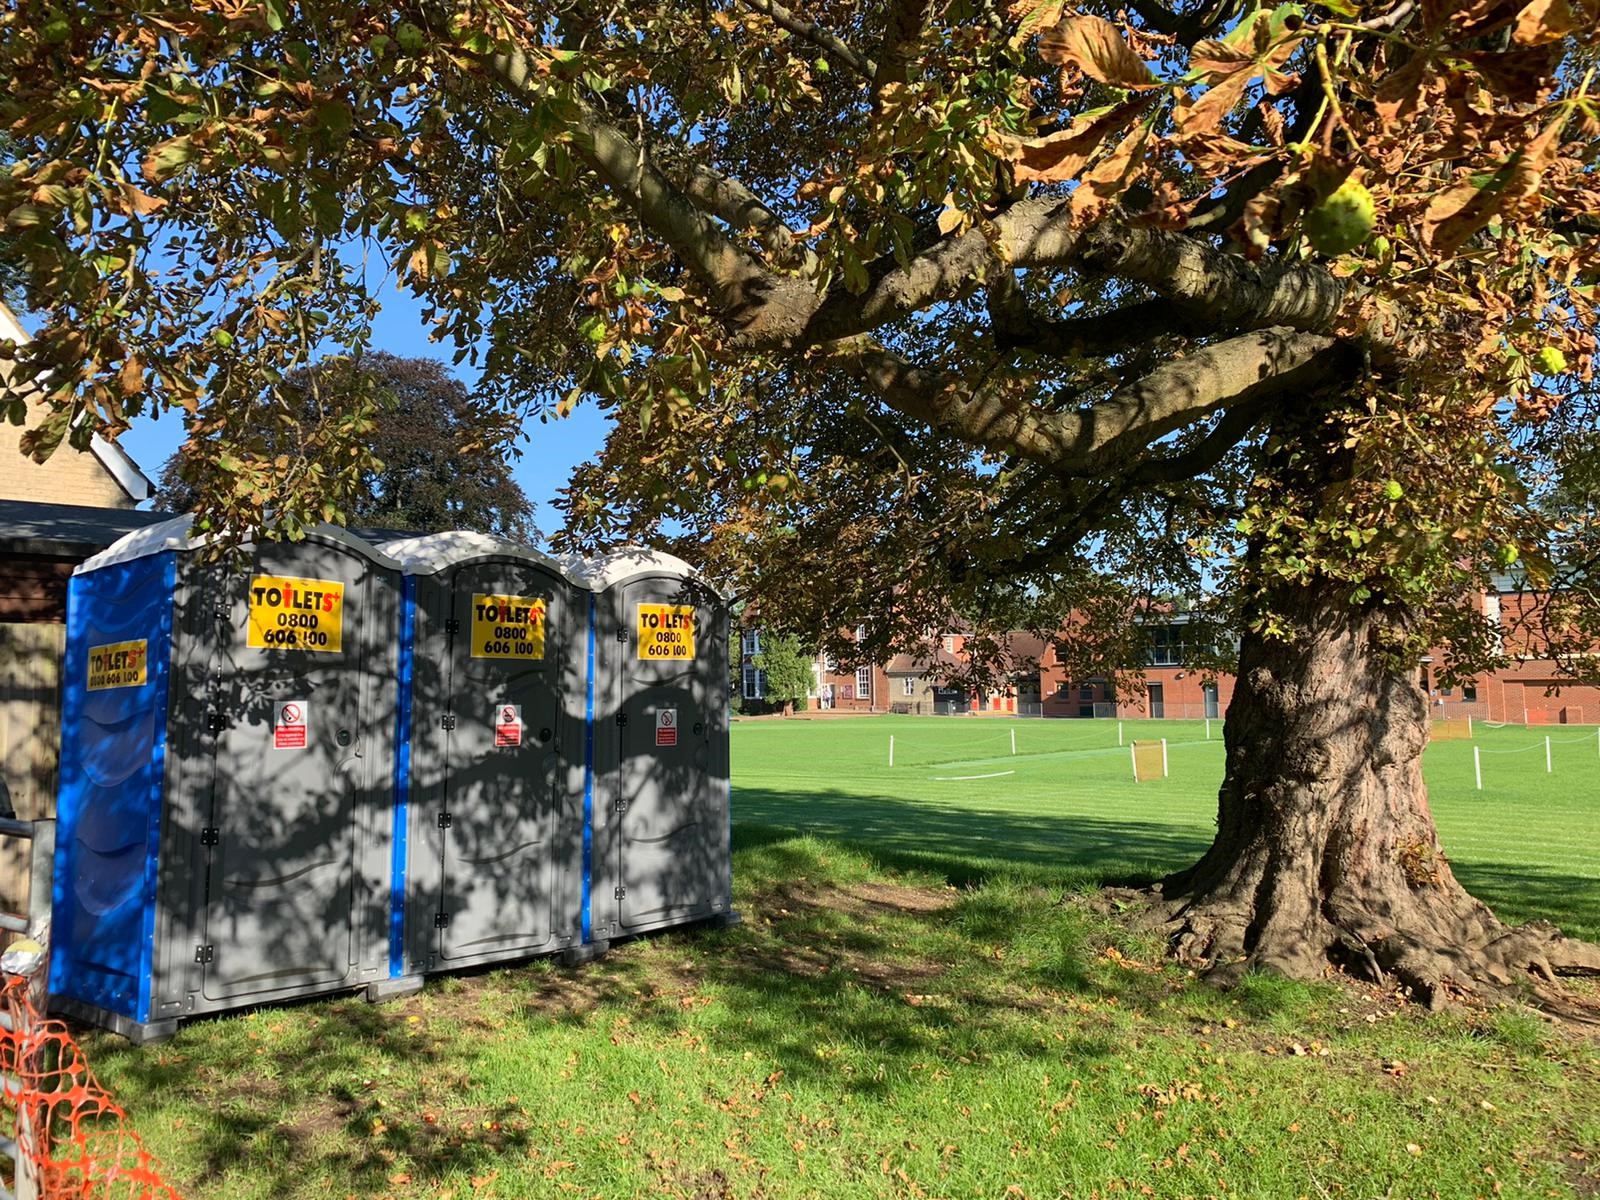 disabled portable toilet in school field